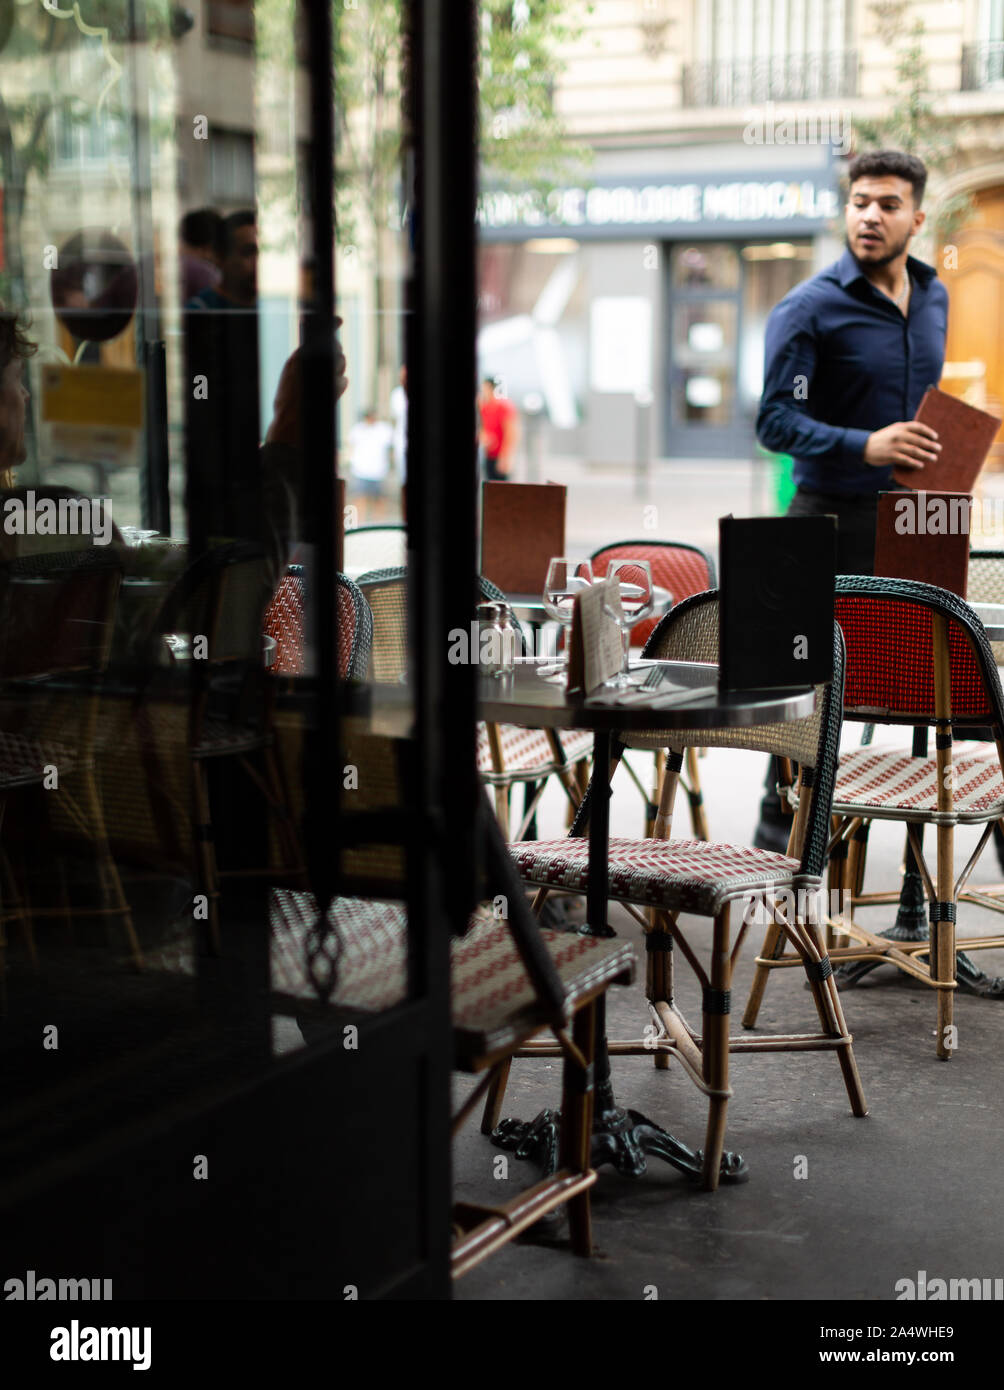 Cafes in Paris France. The Cafe Culture has been in existence in Paris since the 17th century. Stock Photo